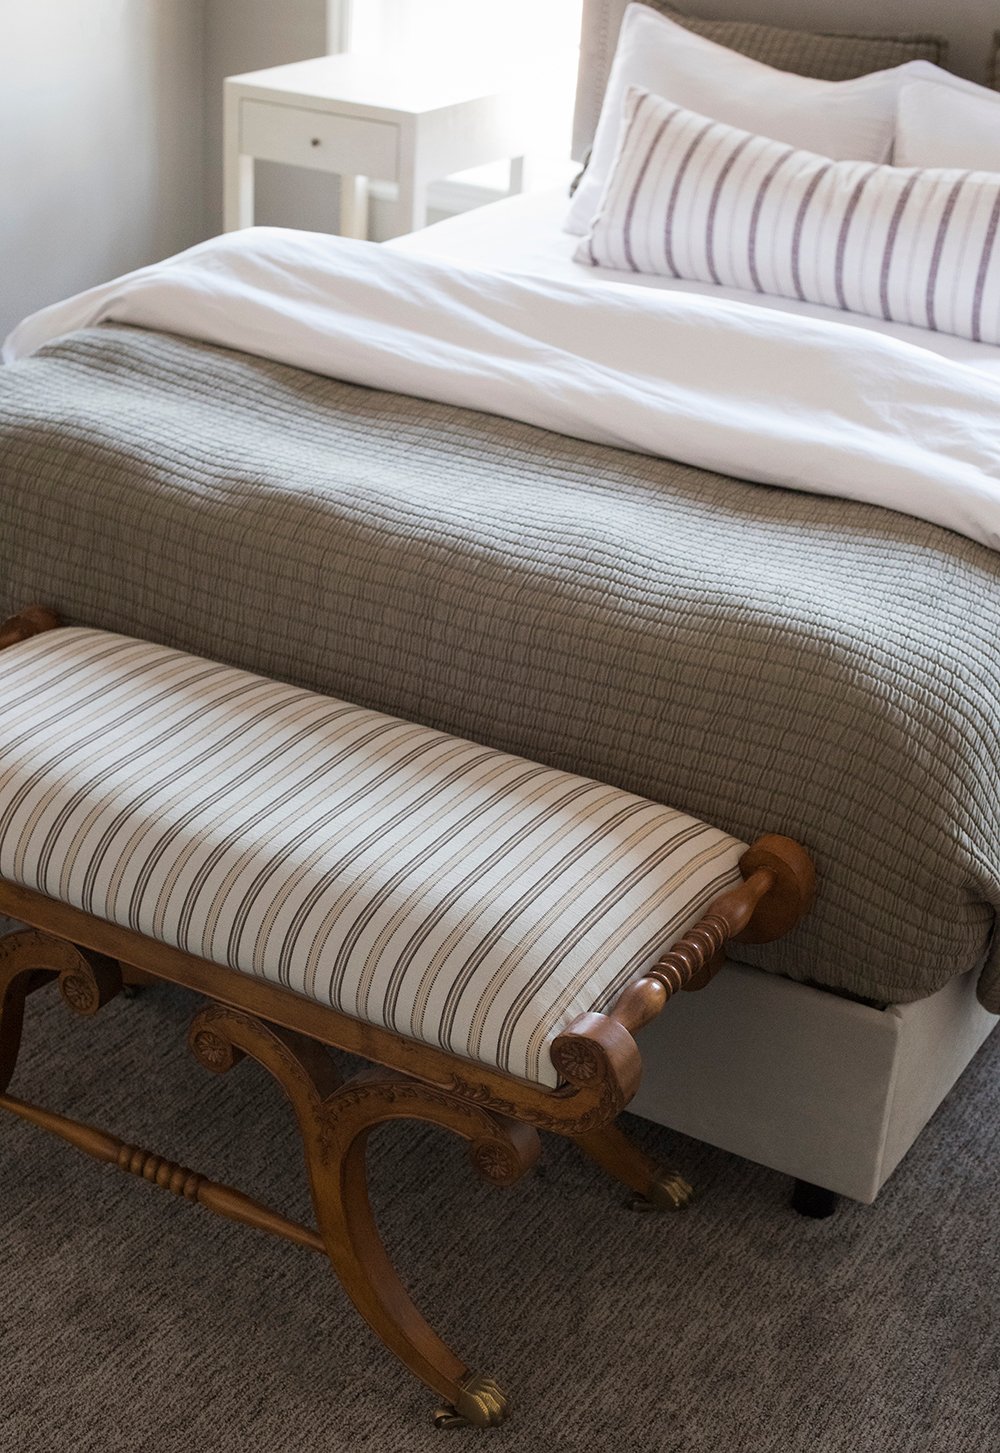 Roundup : Ottomans & Benches for the End of Your Bed - roomfortuesday.com